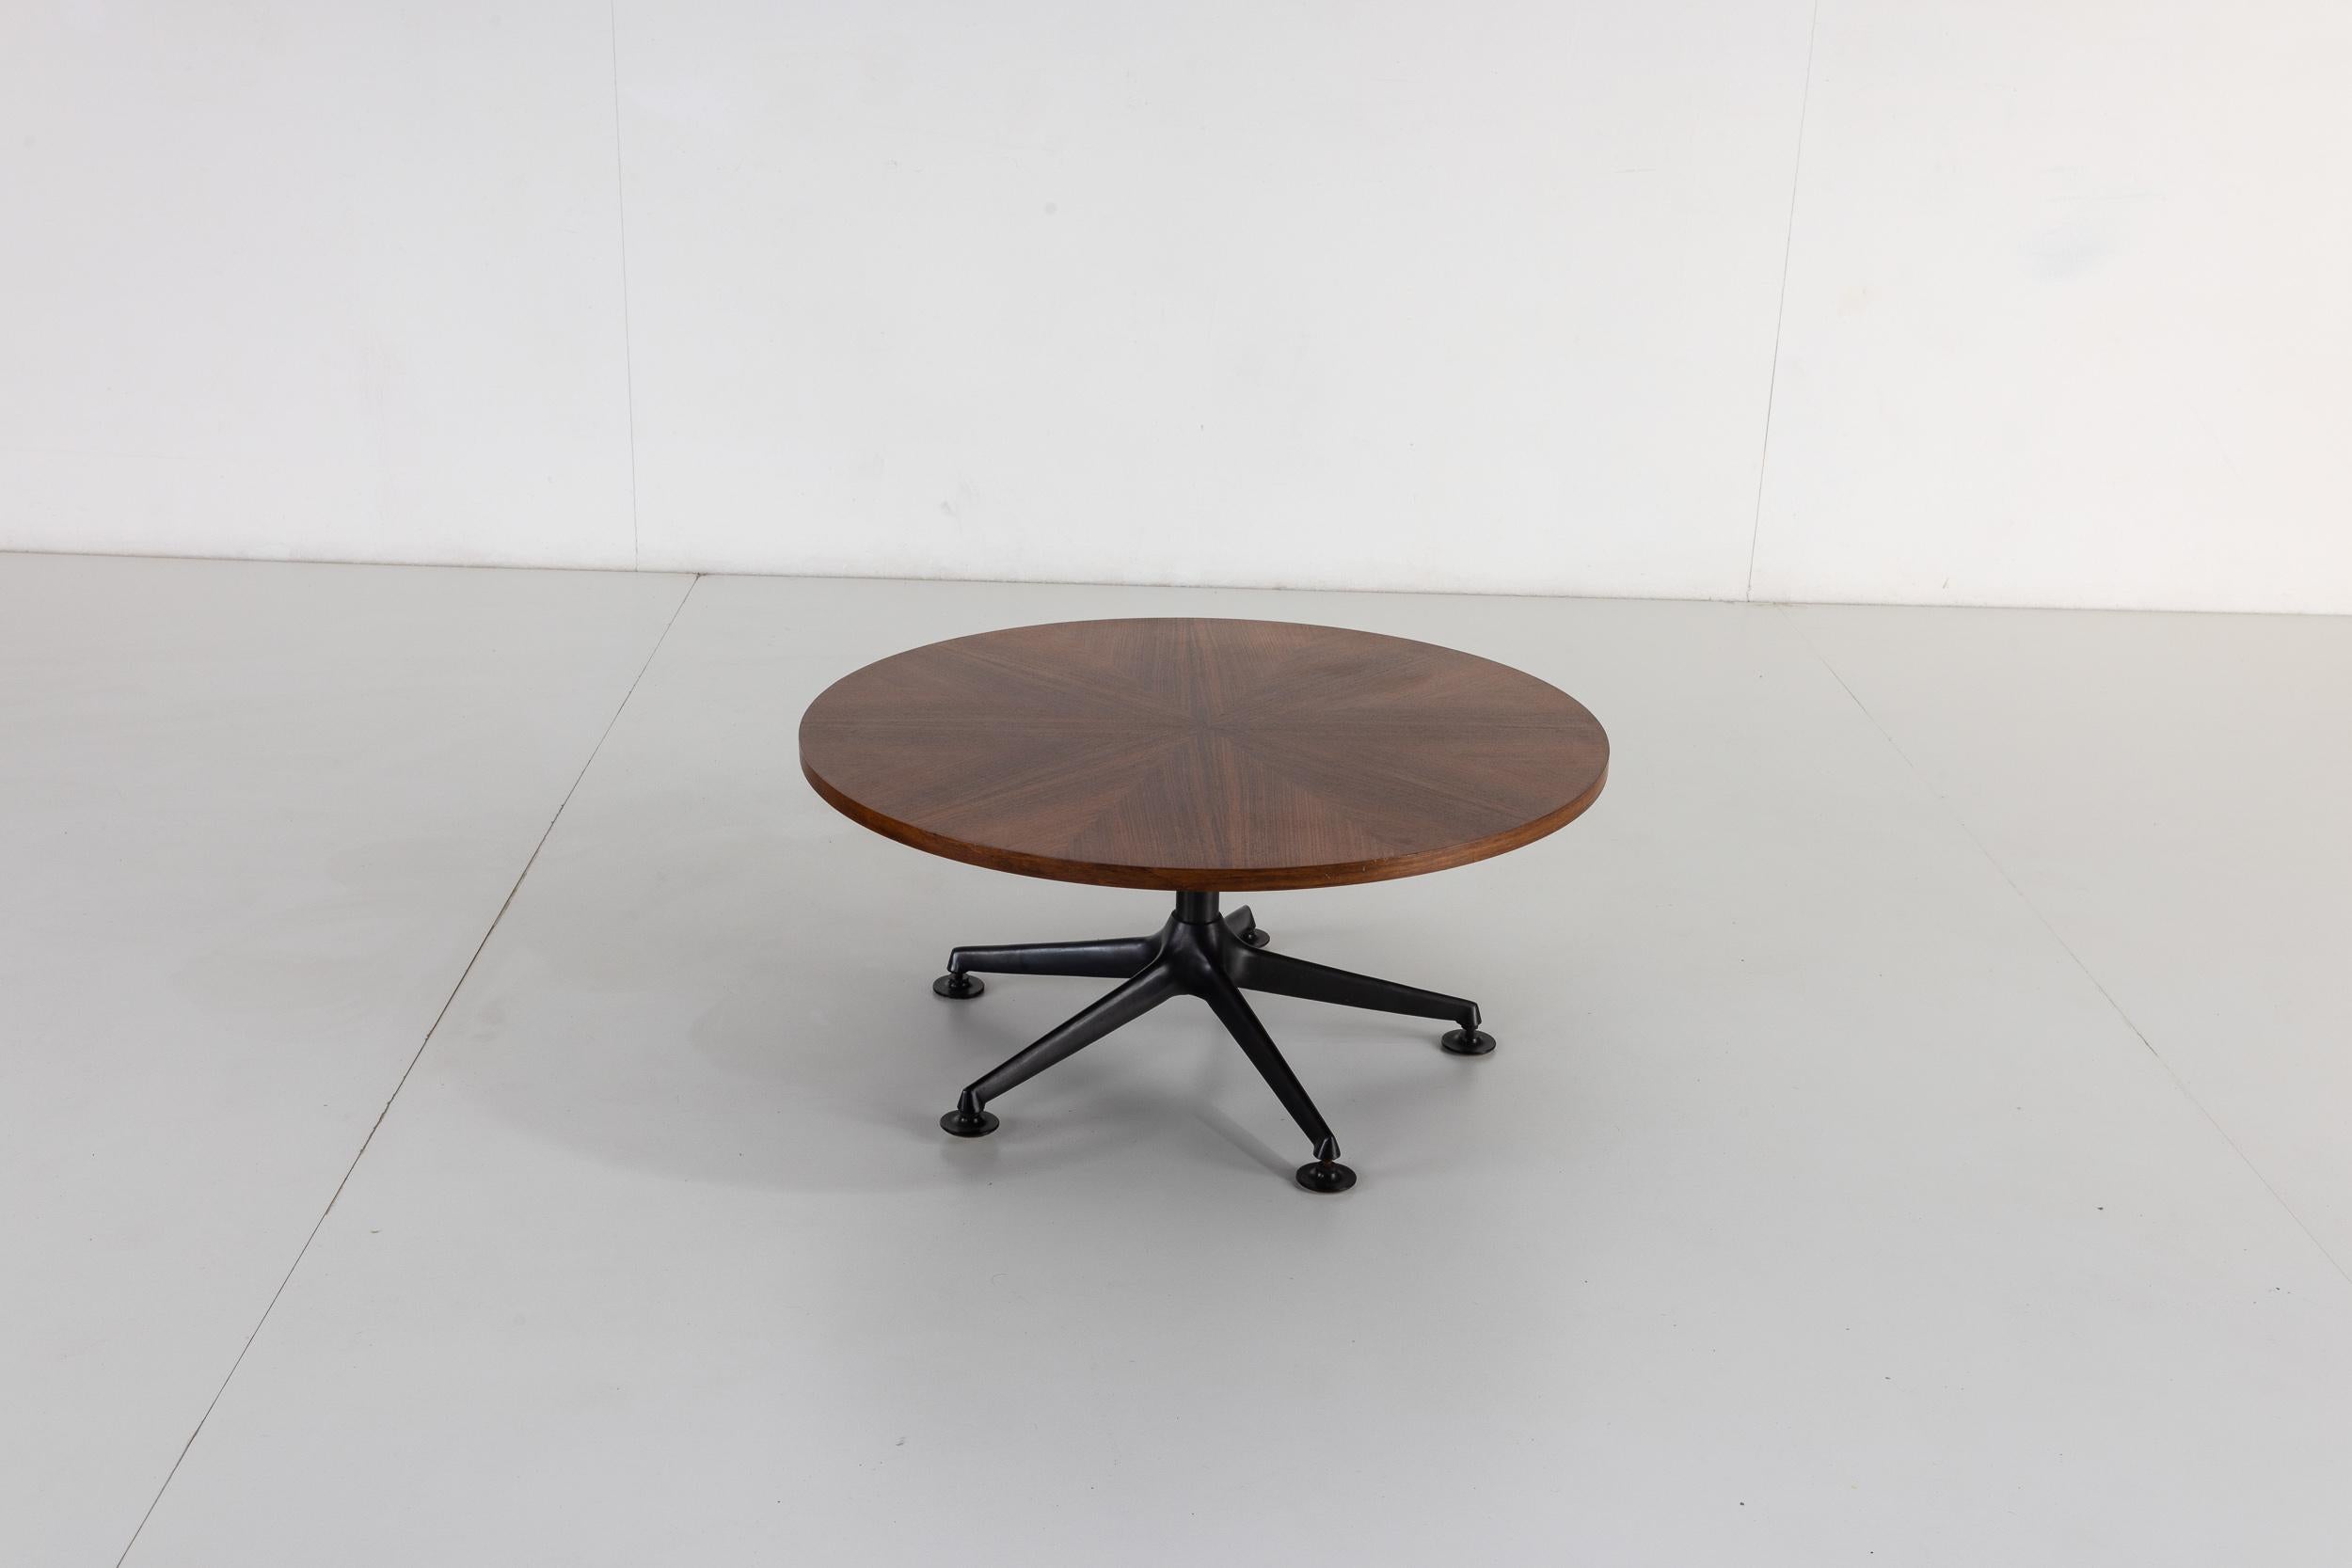 This exceptional low table made by Ico Parisi around 1960 represents a rich period of collaboration between the designer and the MIM (Mobili Italiani Moderni) which was established in Rome in 1957 as a company to design, build and sell